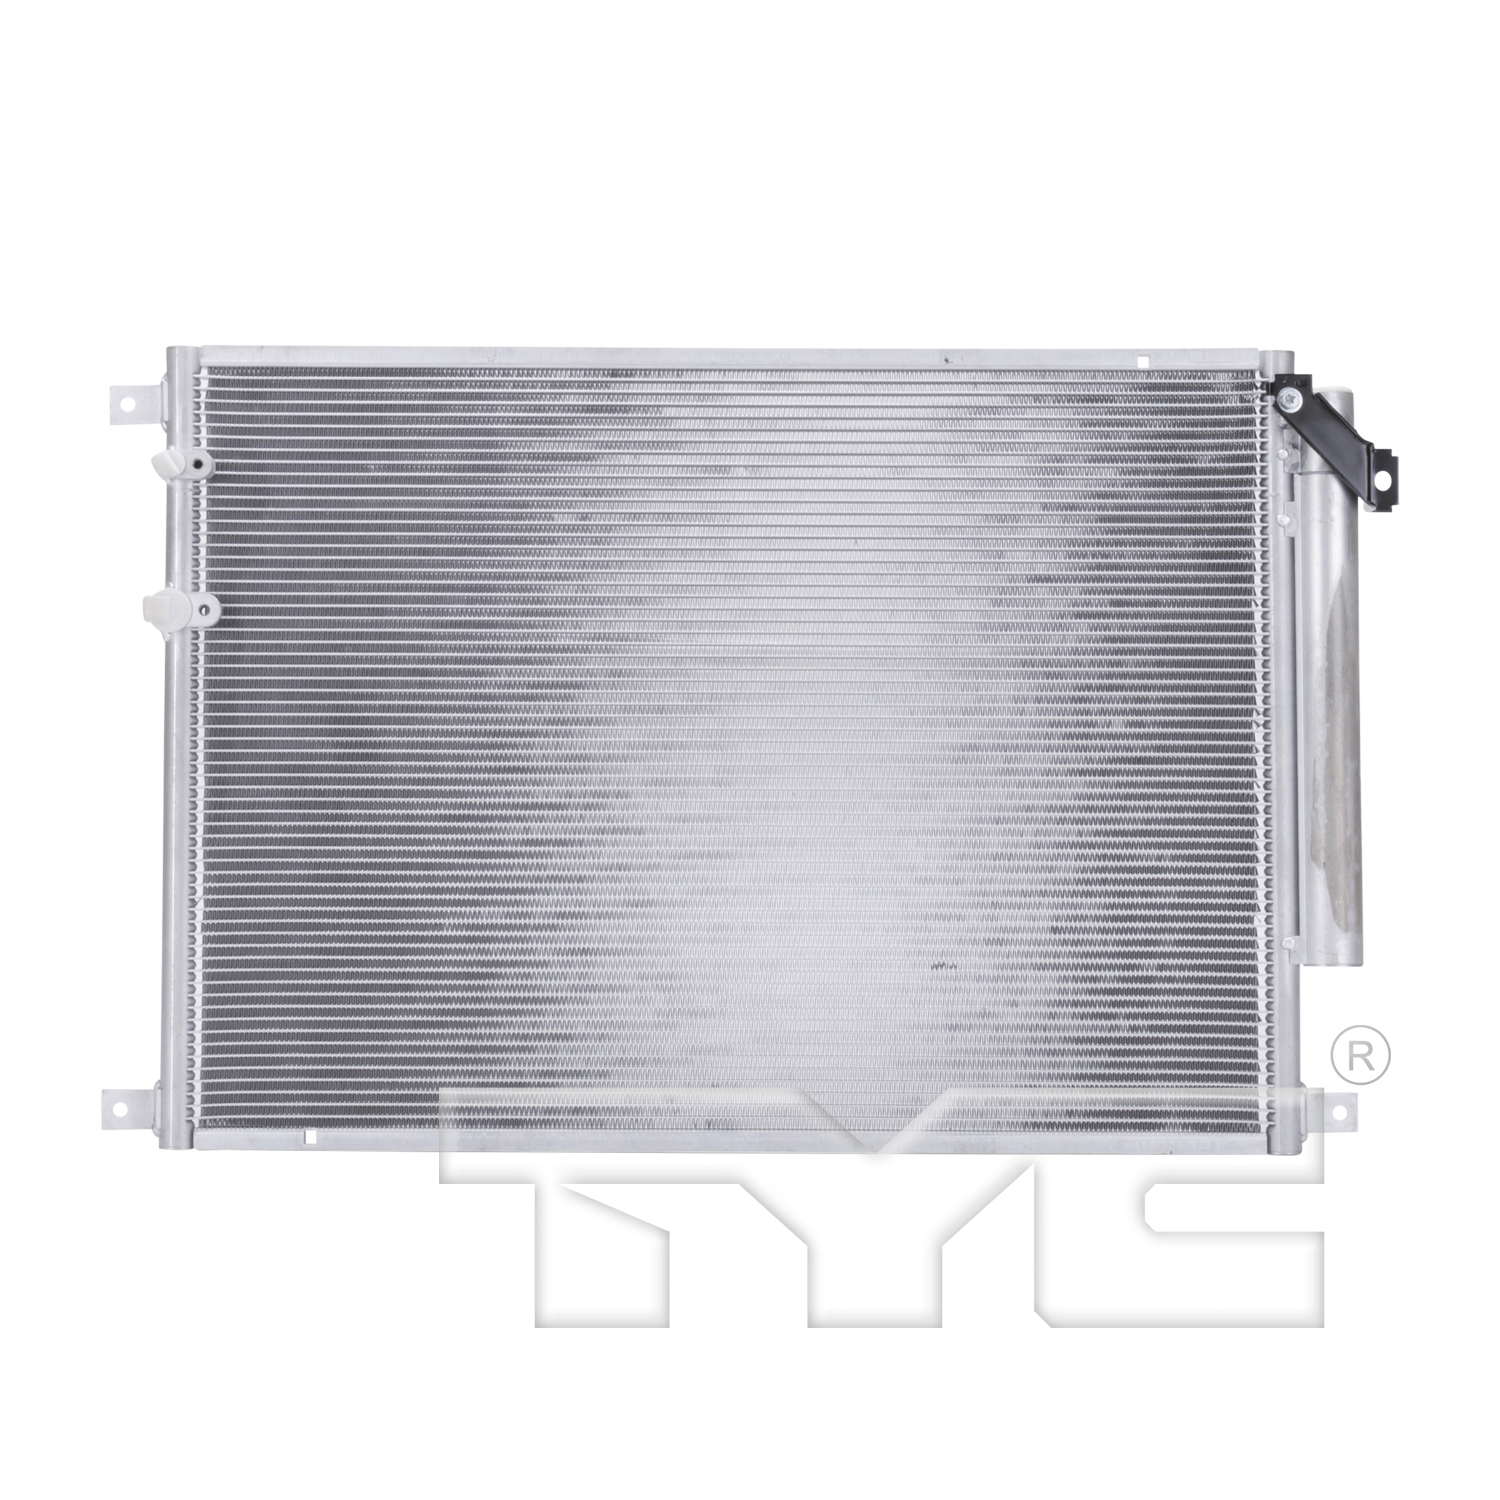 Aftermarket AC CONDENSERS for CADILLAC - CTS, CTS,08-13,Air conditioning condenser